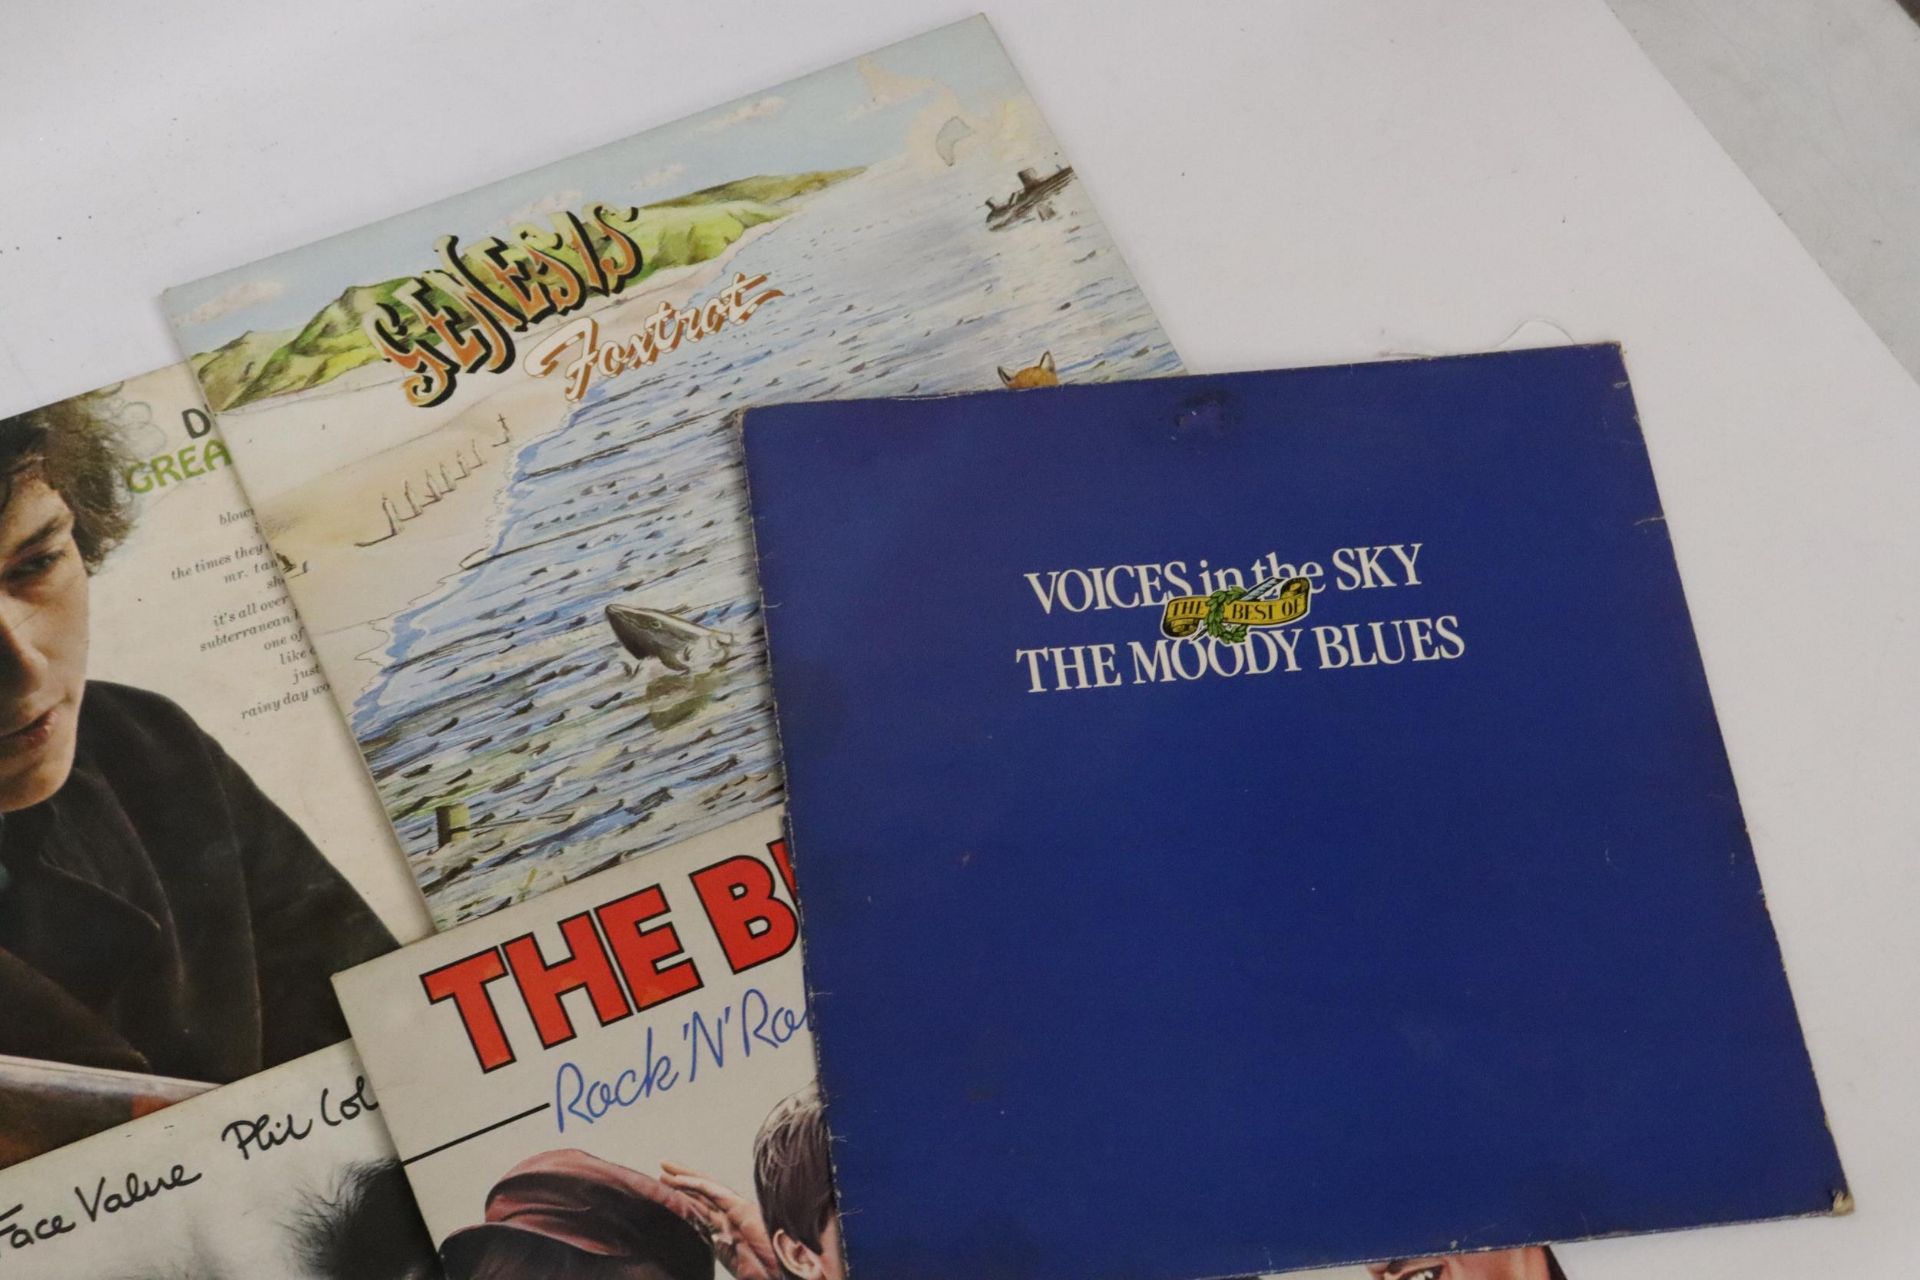 A COLLECTION OF VINYL LP RECORDS TO INCLUDE GENESIS, FOXTROT, THE BEATLES, ABBEY ROAD, BOB DYLAN, - Image 4 of 5